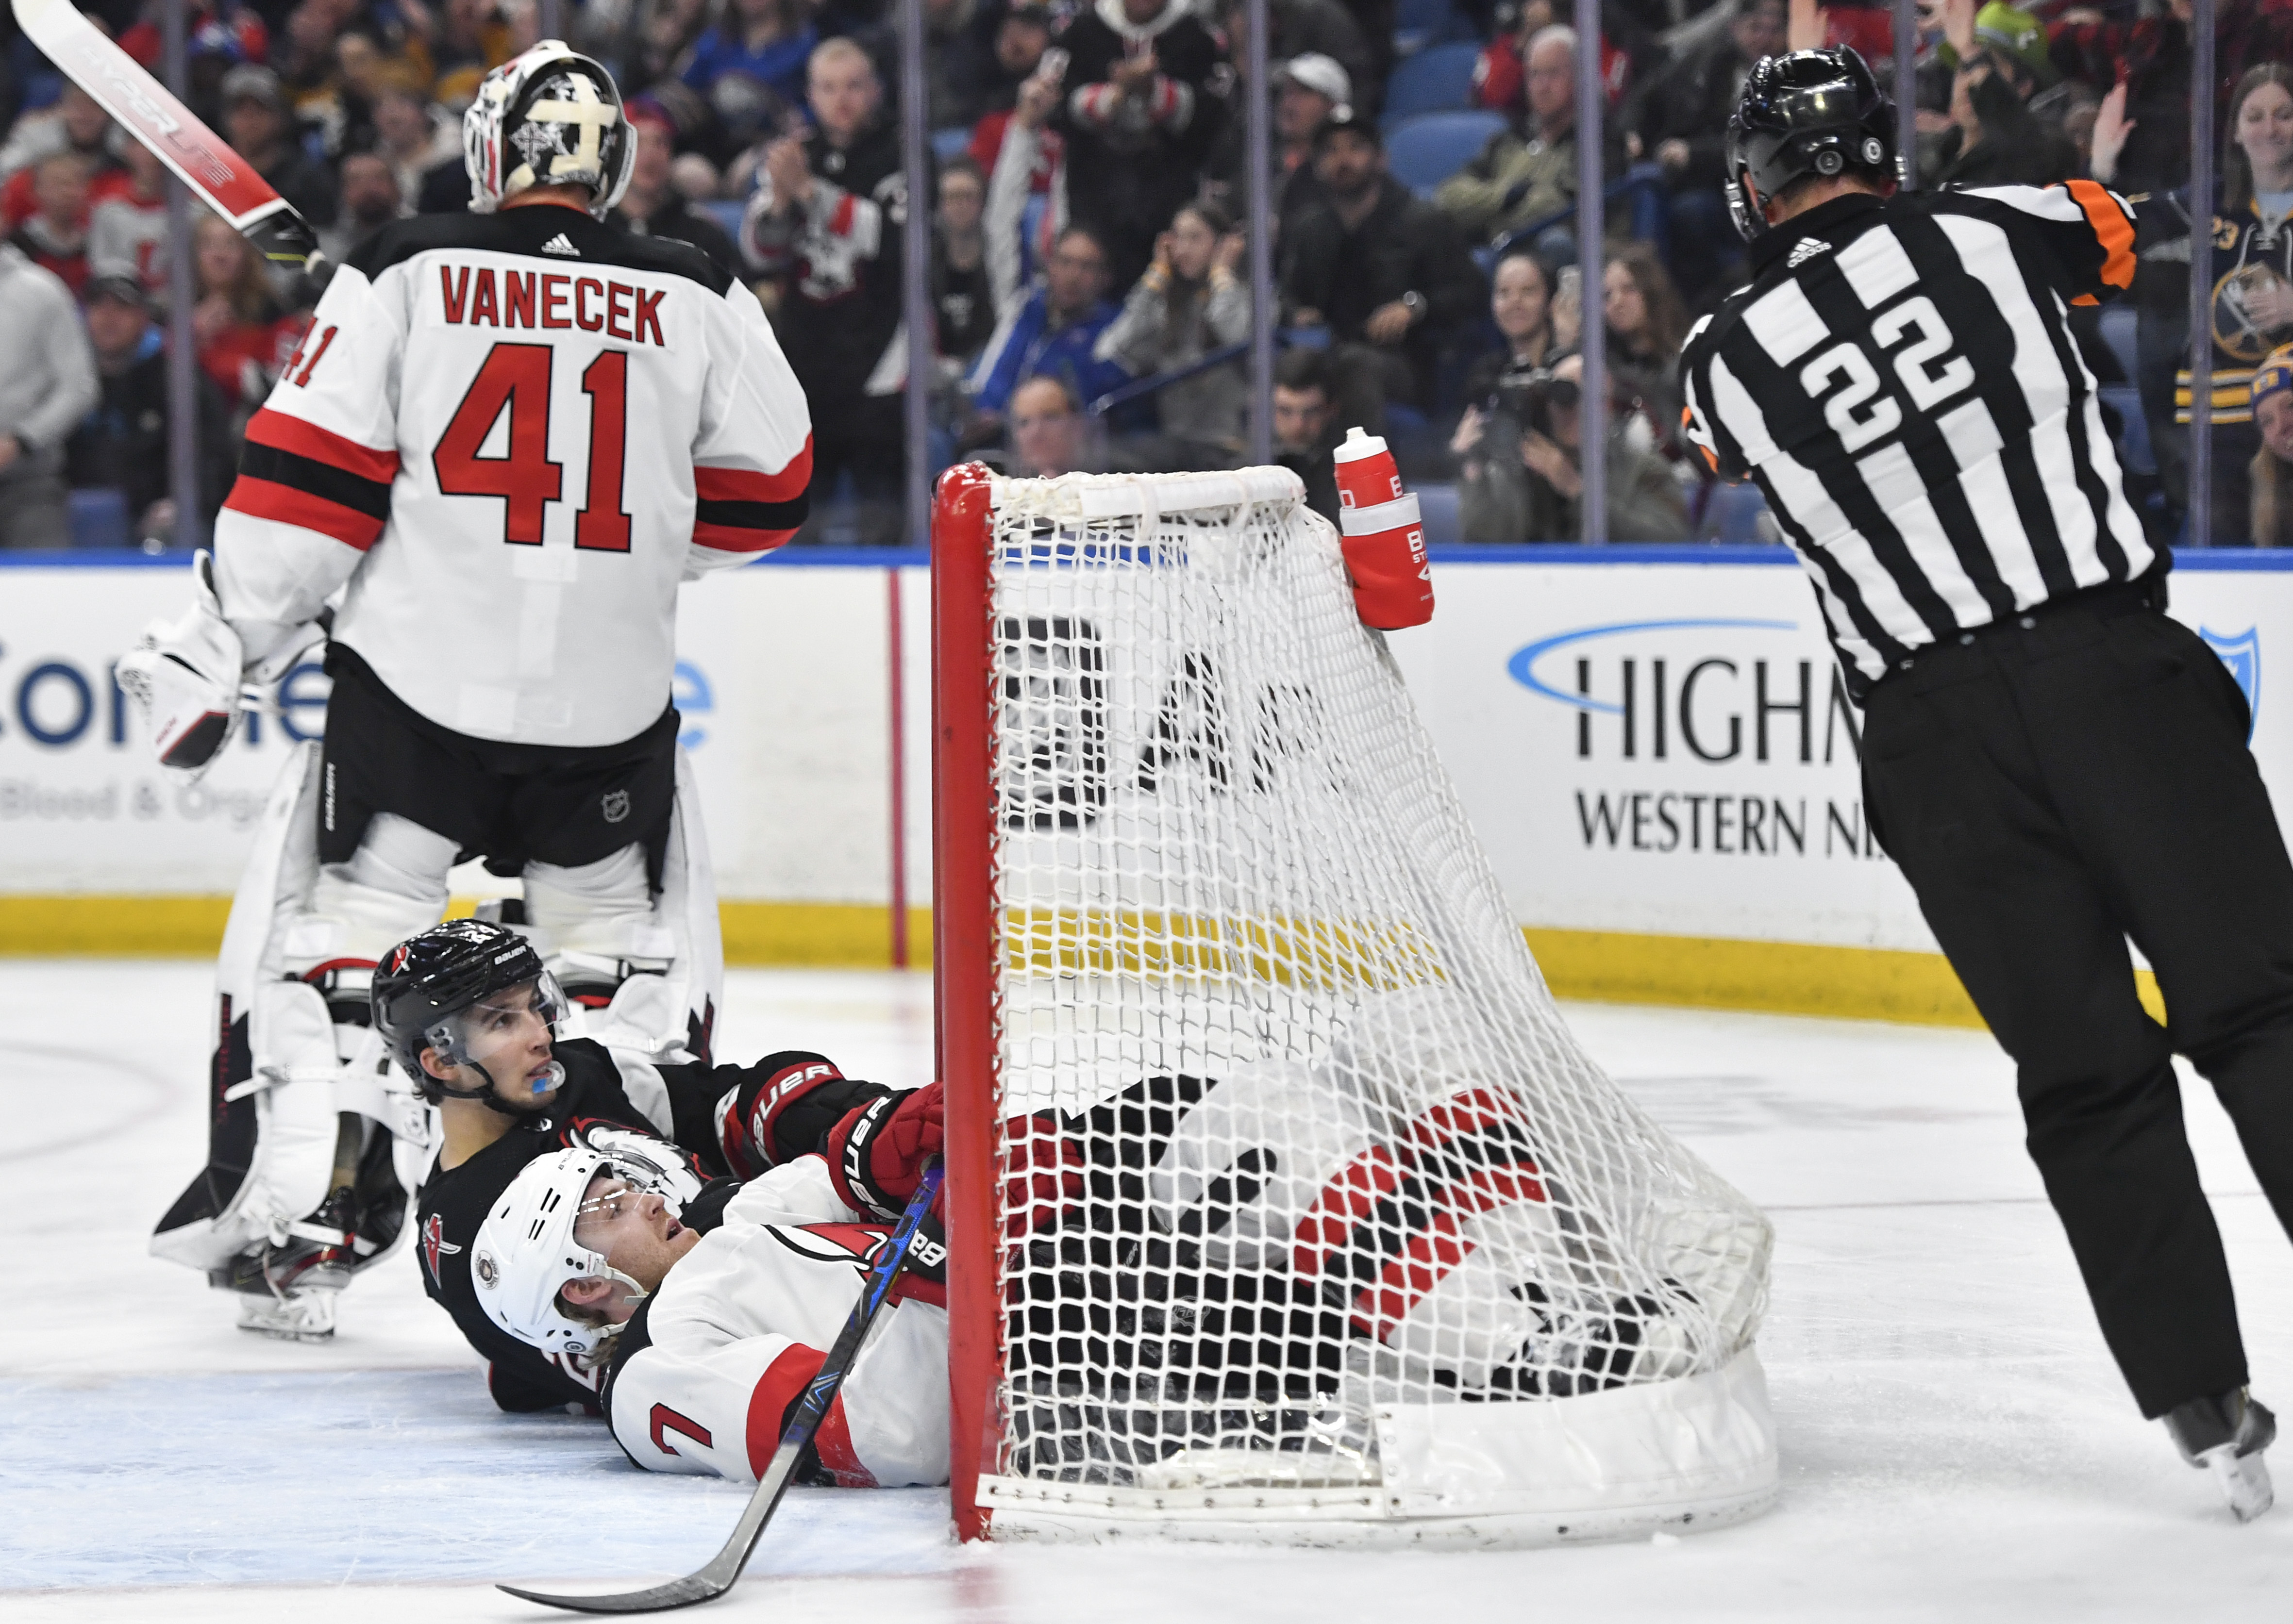 Devils clinch home ice for playoffs; end Sabres hopes - The San Diego  Union-Tribune